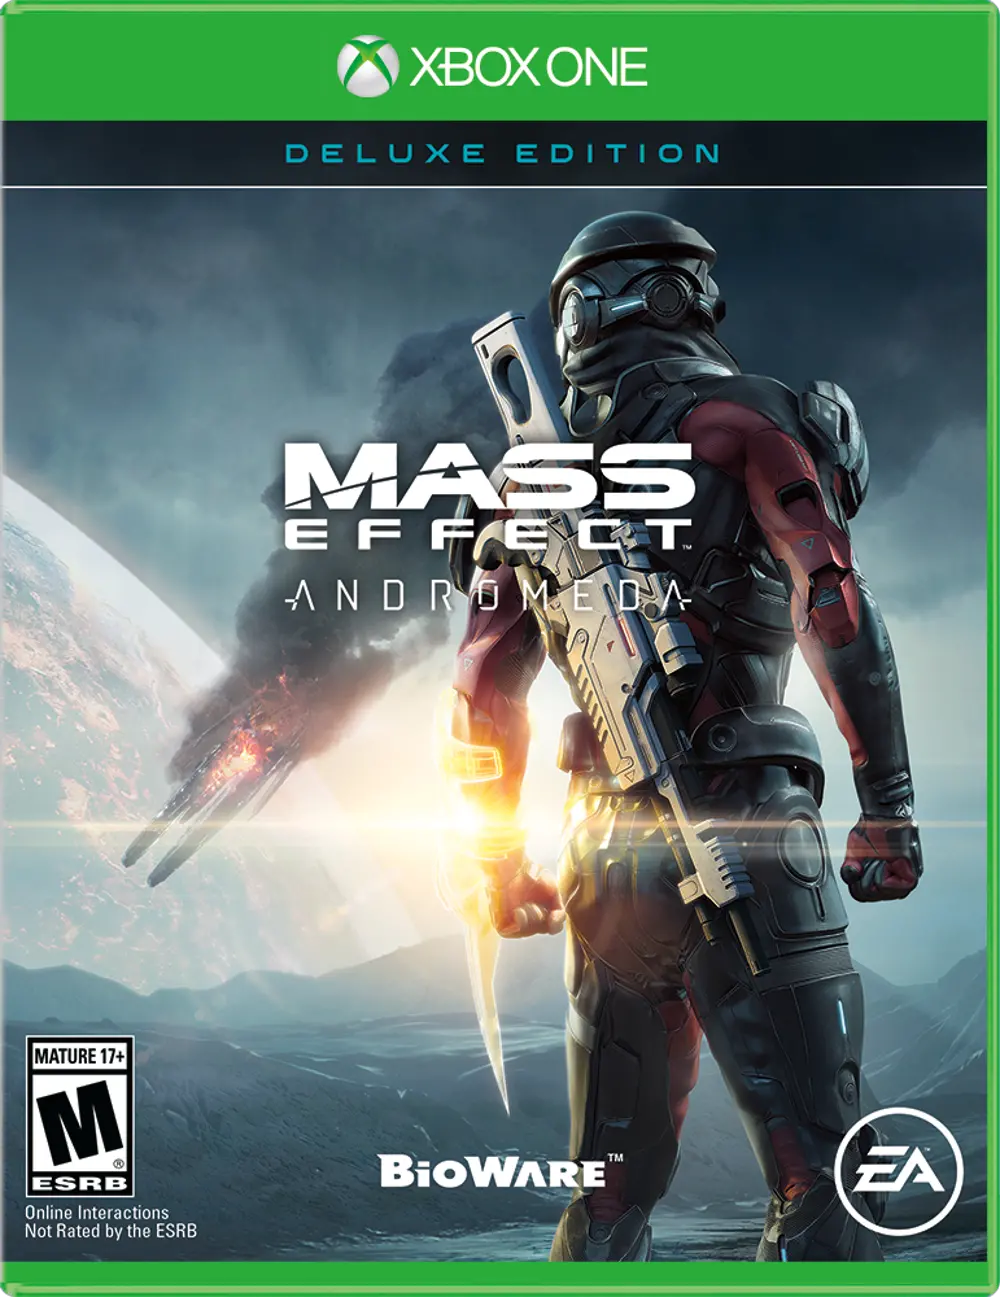 XB1 ELA 73650 Mass Effect: Andromeda Deluxe Edition - XBOX One-1